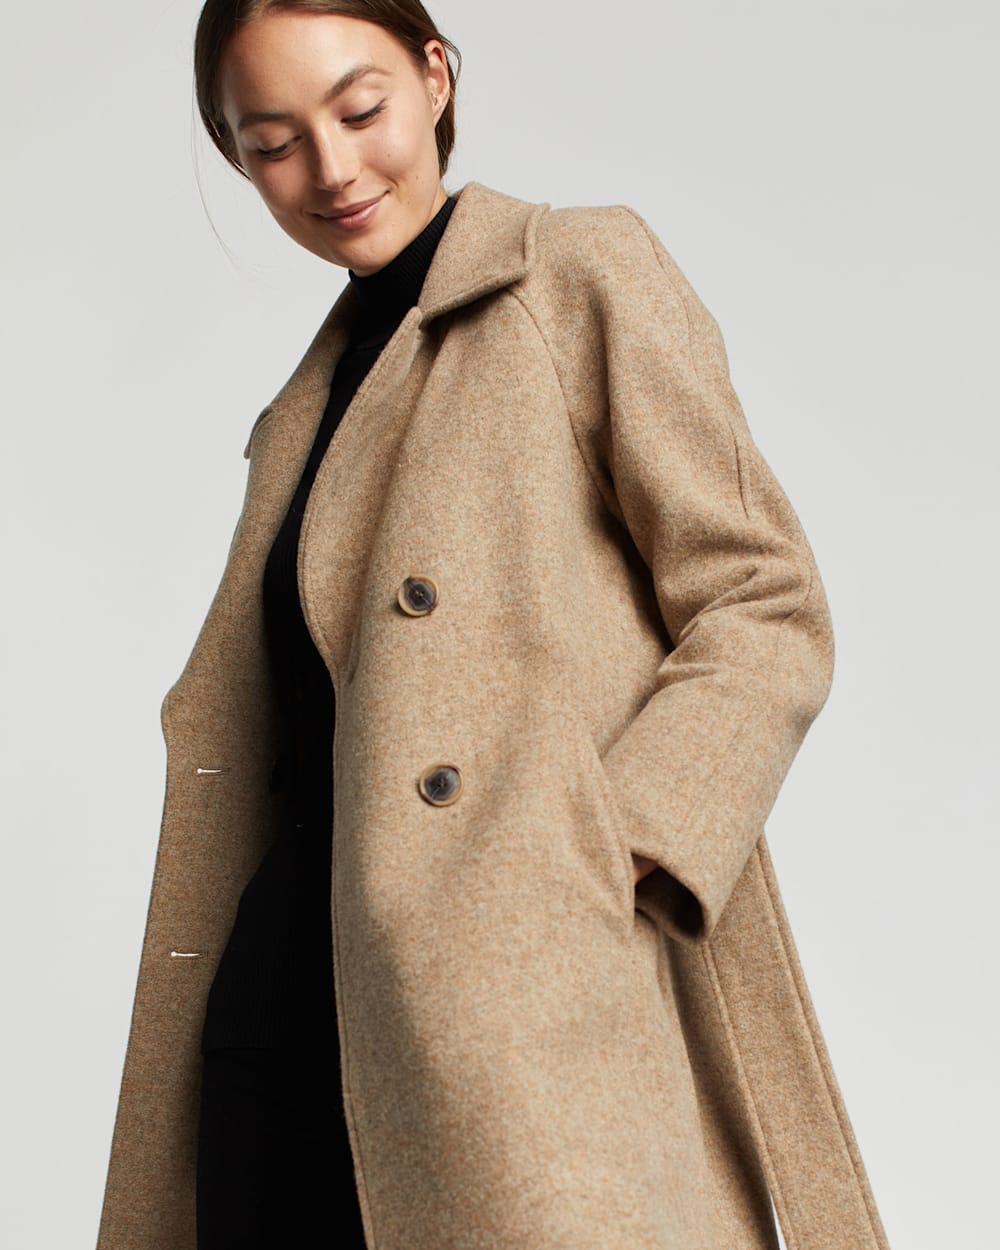 ALTERNATE VIEW OF WOMEN'S UPTOWN LONG WOOL COAT IN WHEAT image number 5